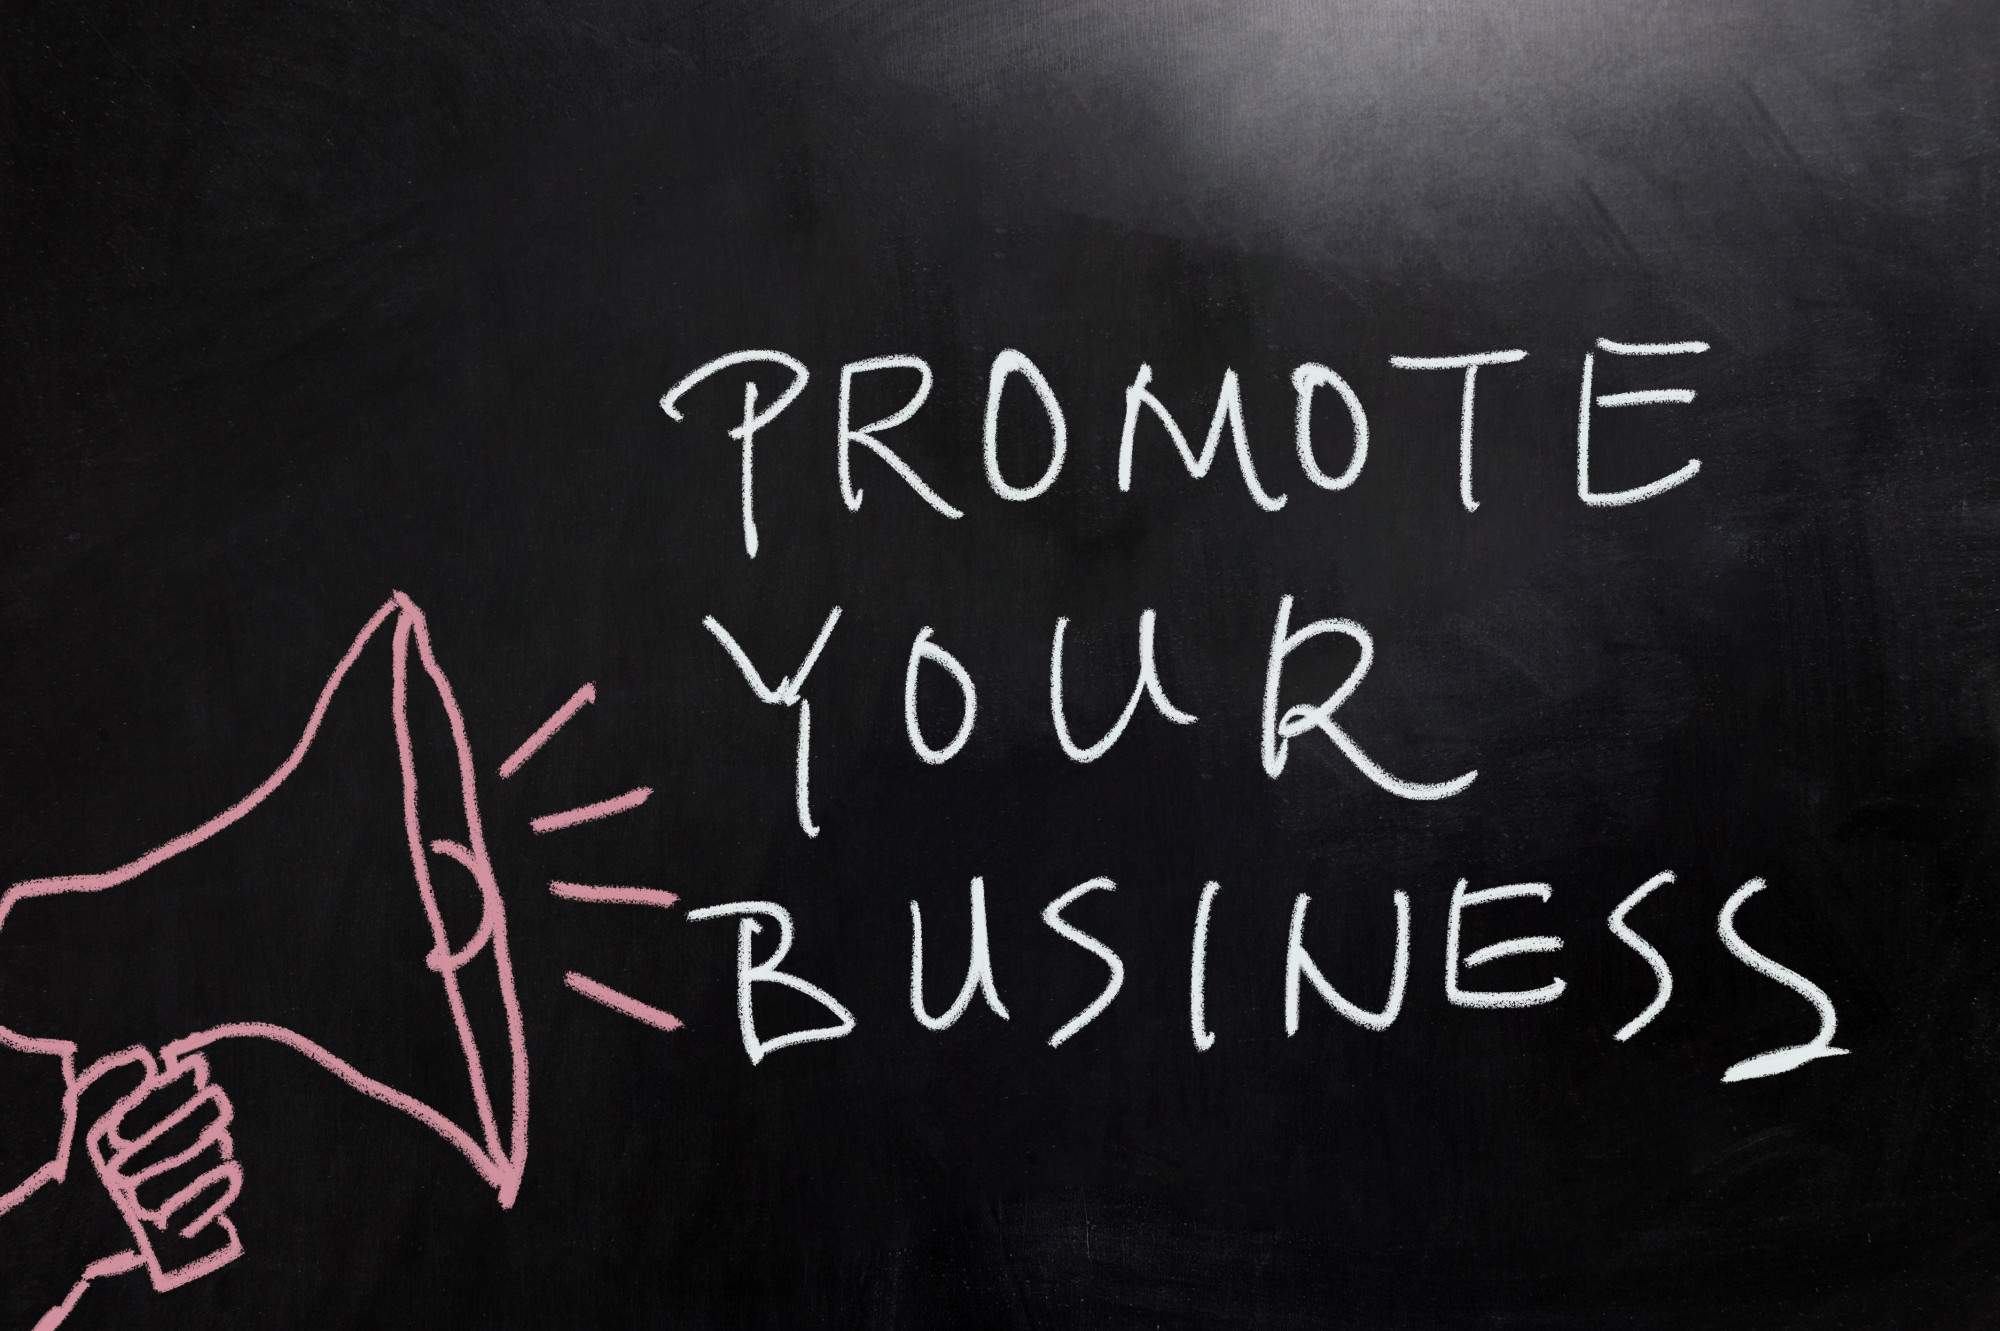 Business Promotions: 3 Fun Ways To Promote Your Business